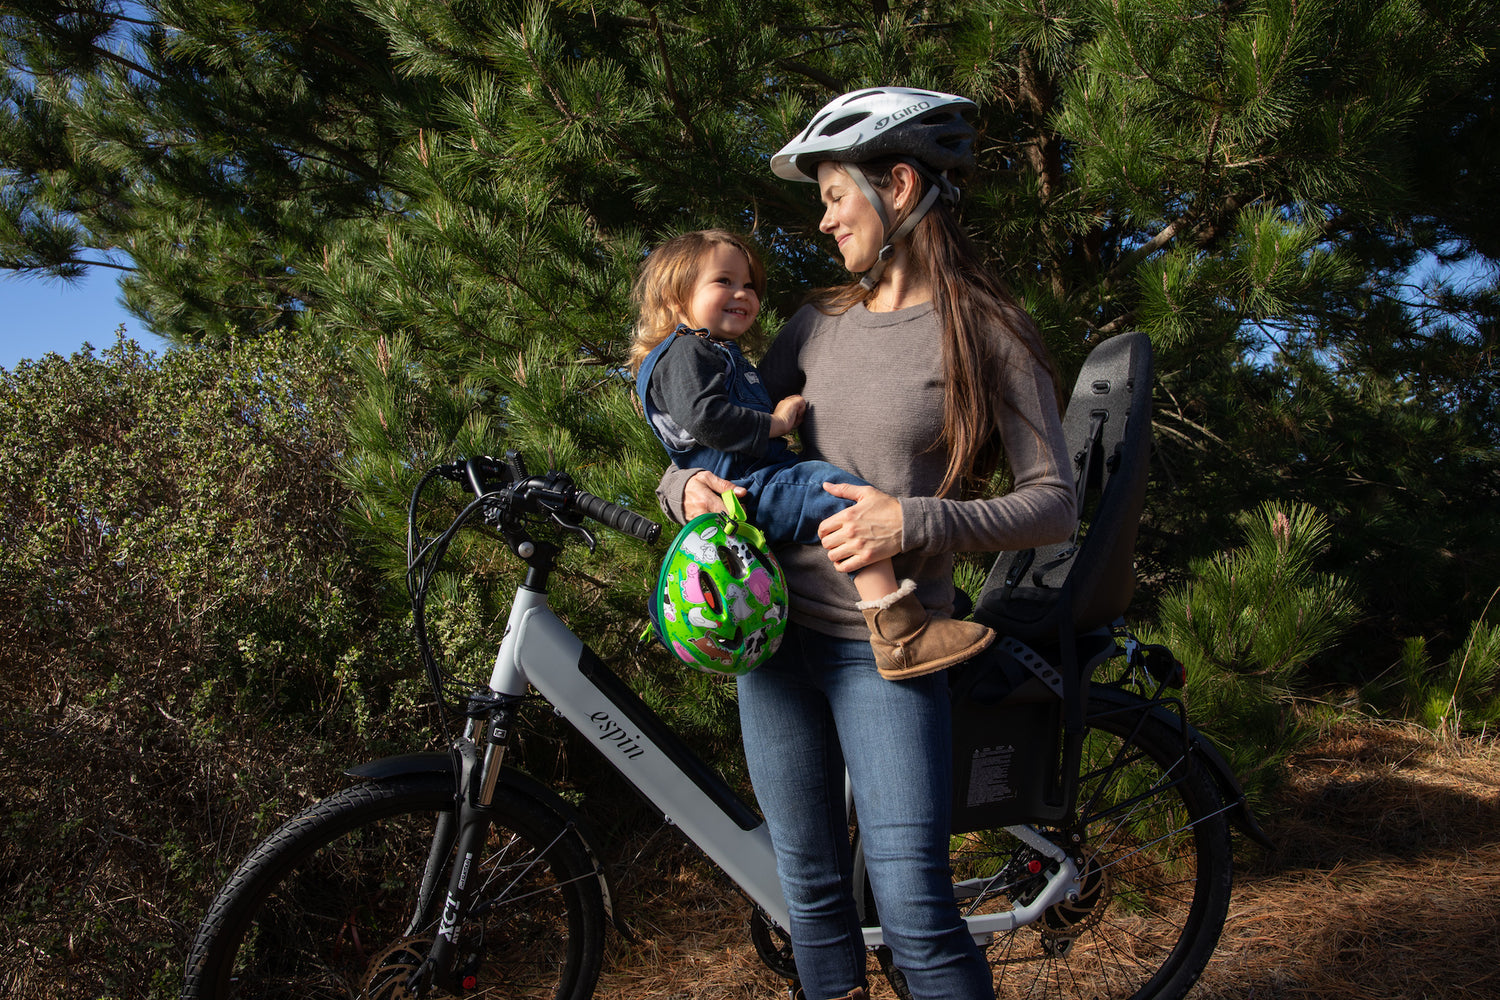 What safety gear is recommended for mountain e-bike riders?